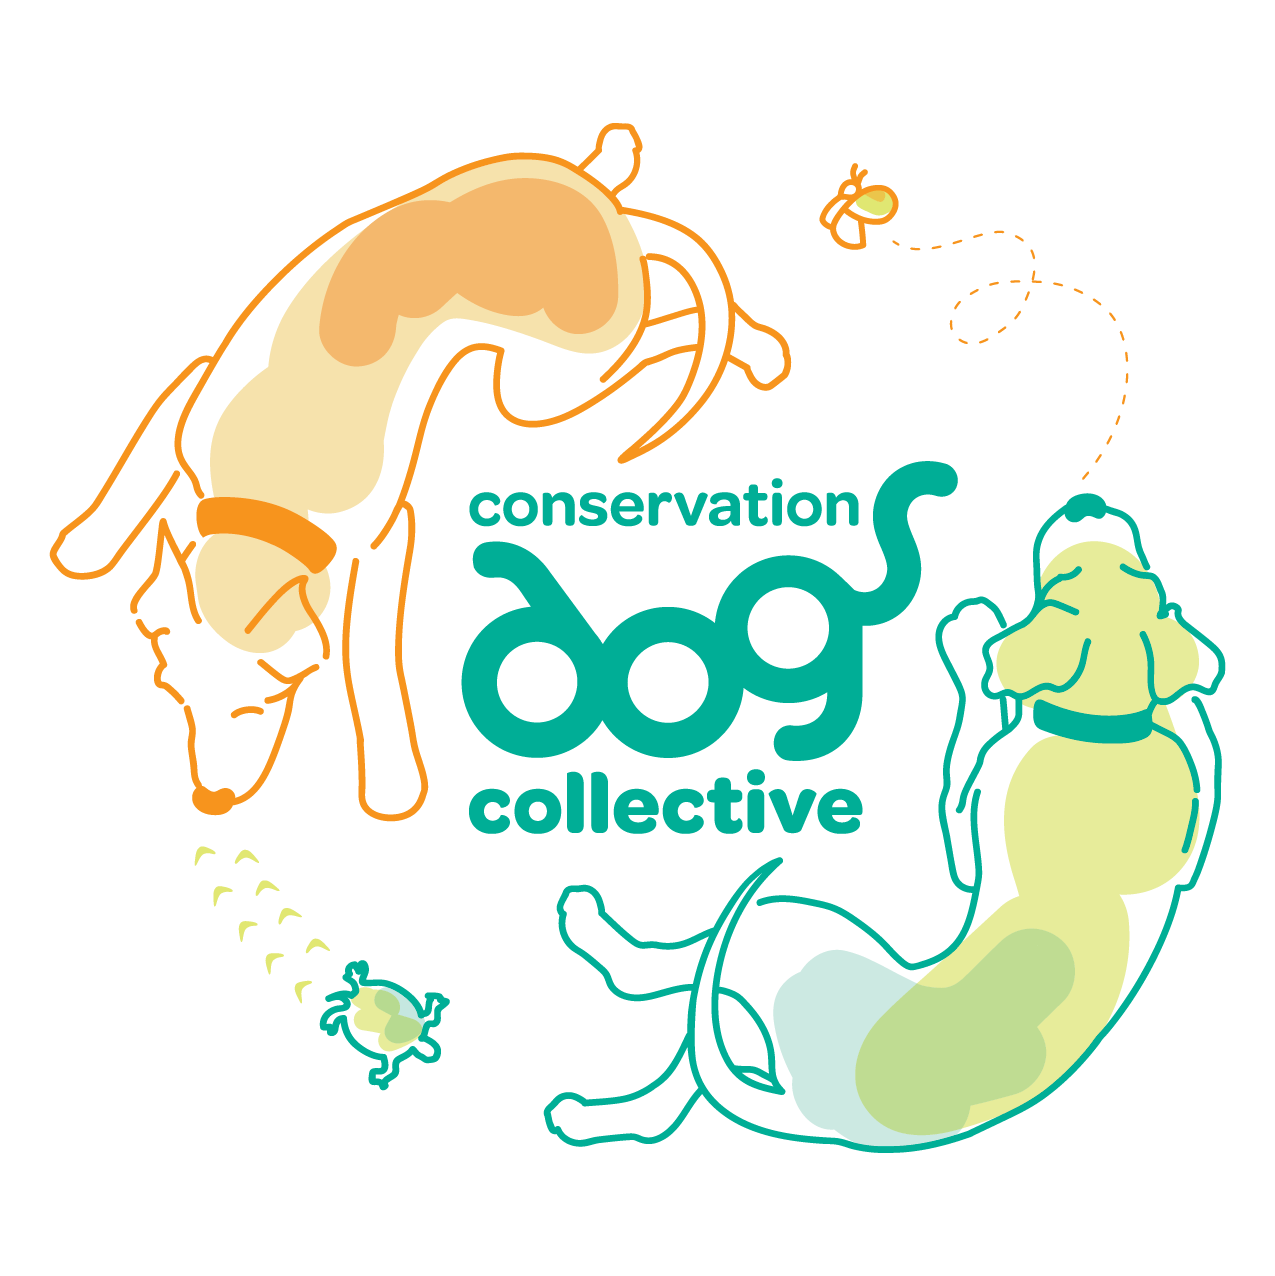 Conservation Dogs Collective, Inc. logo